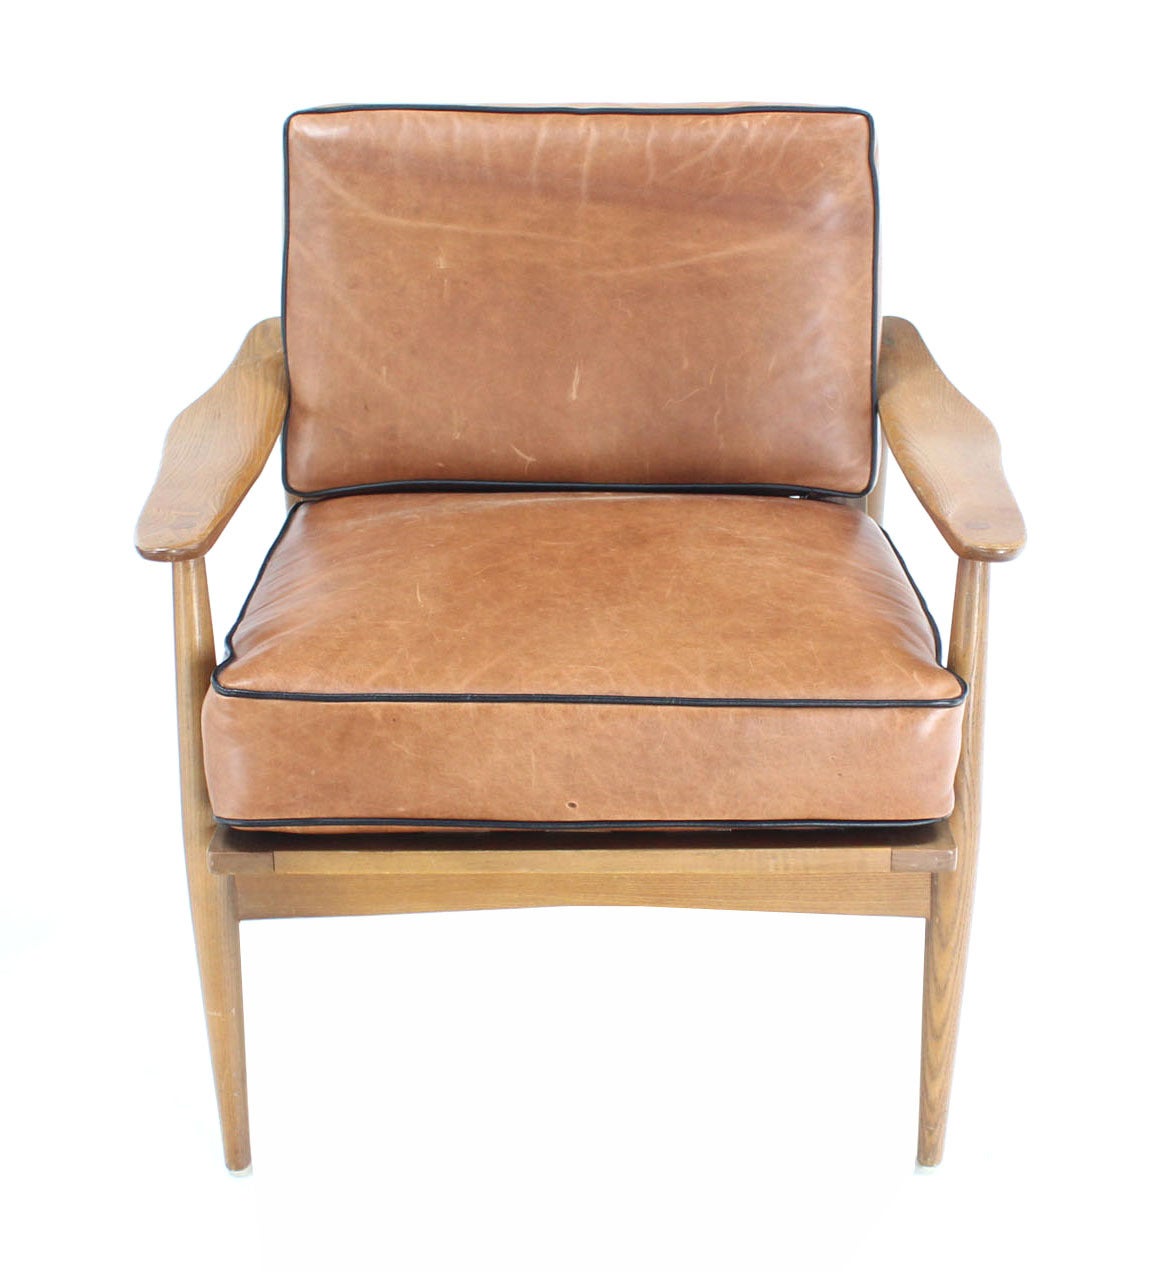 Pair of Danish Mid-Century Modern Leather Upholstery Lounge Chairs 1